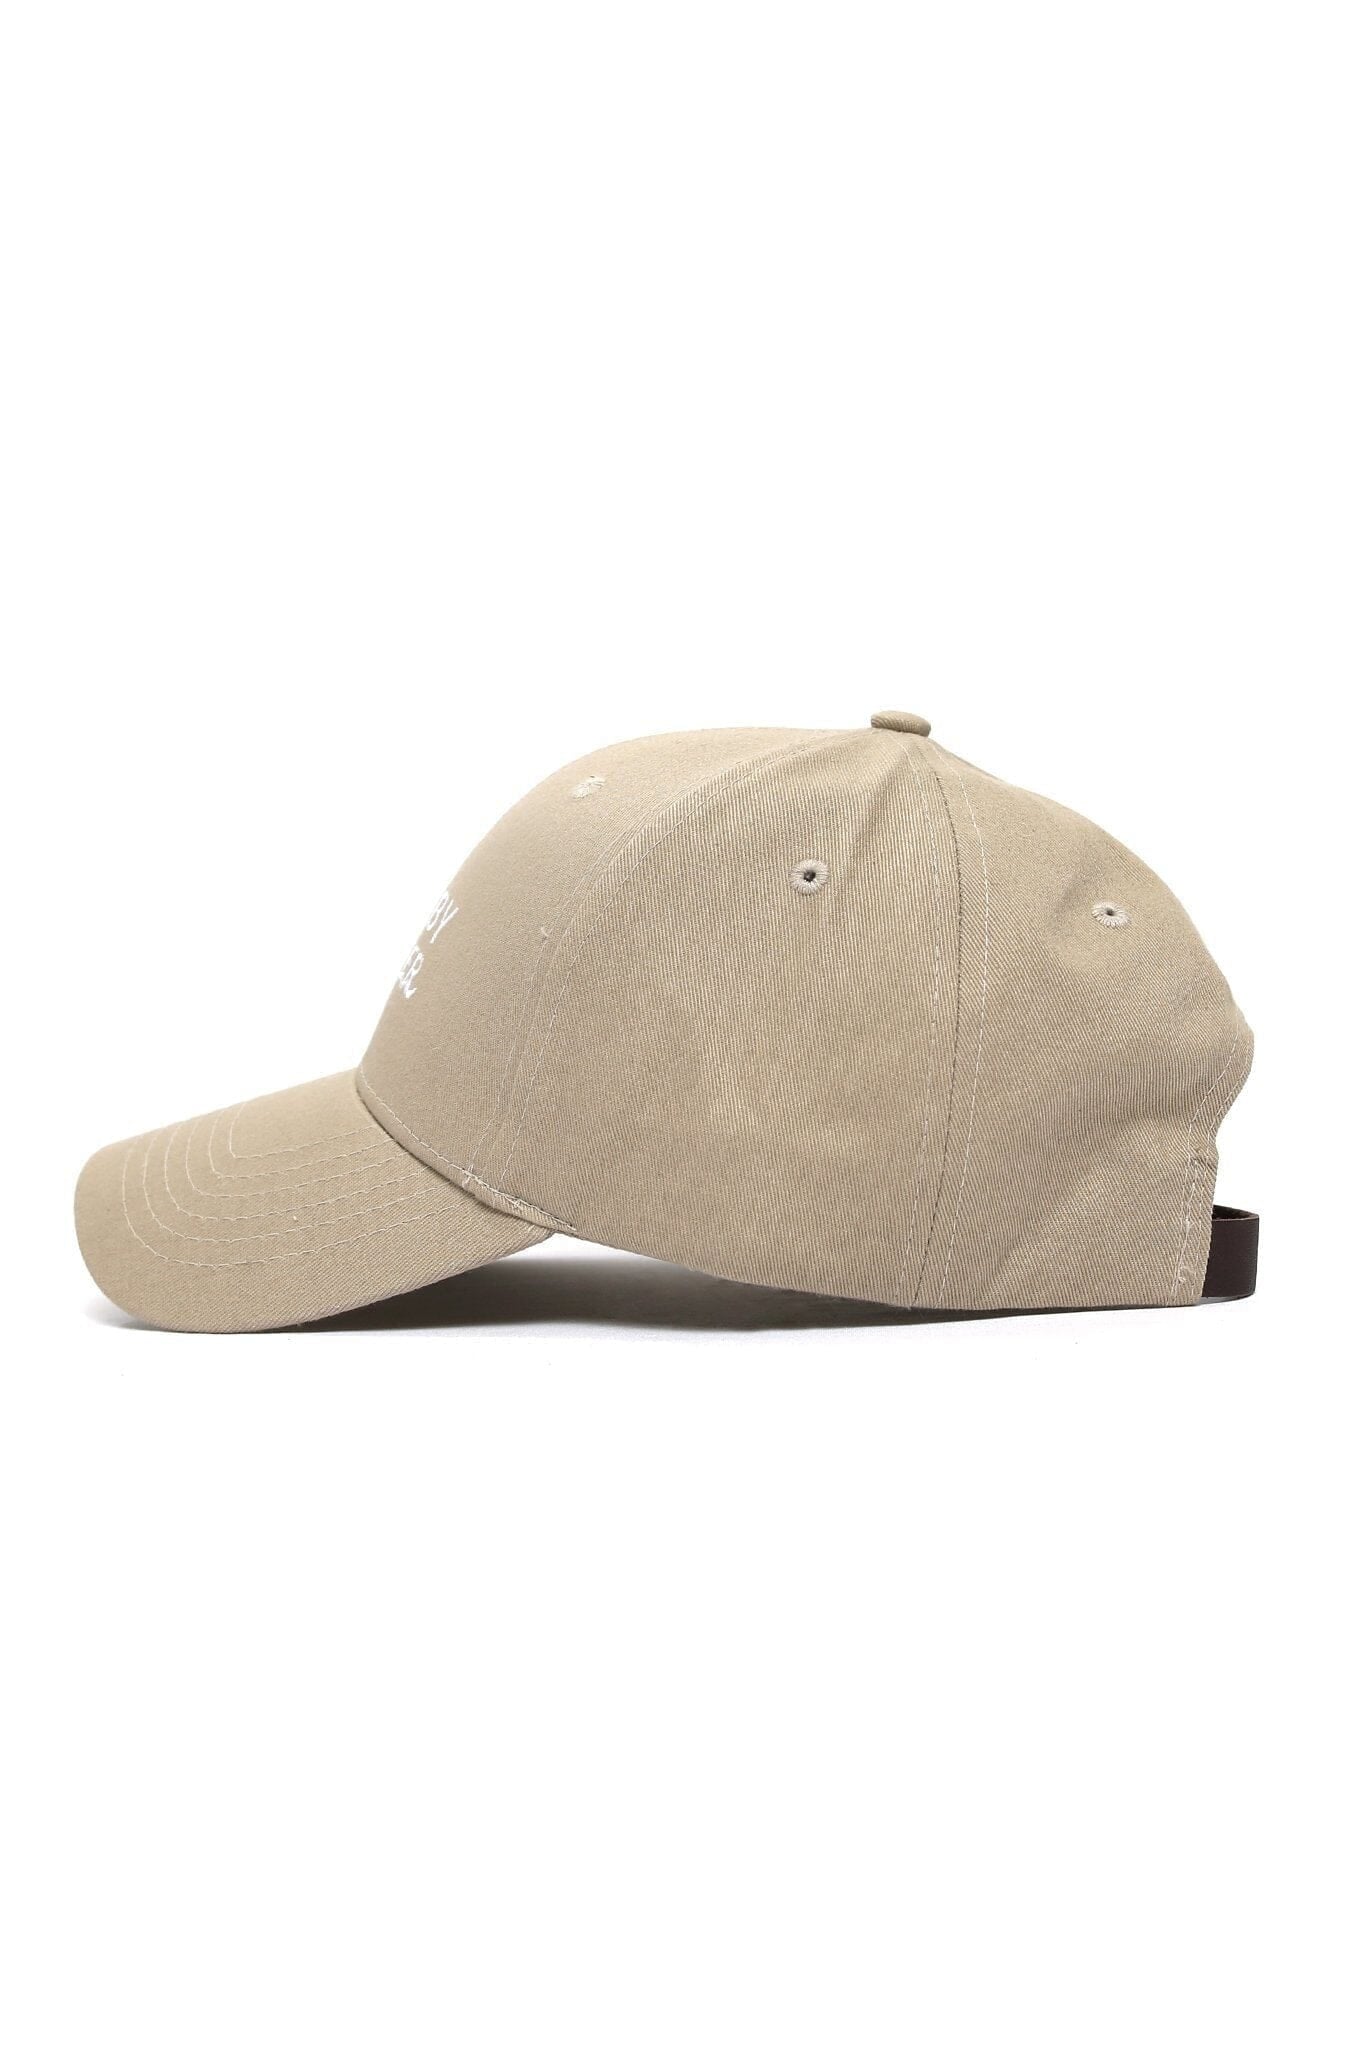 BORN BY WATER WAVES CAP - BR-KHAKI - OS